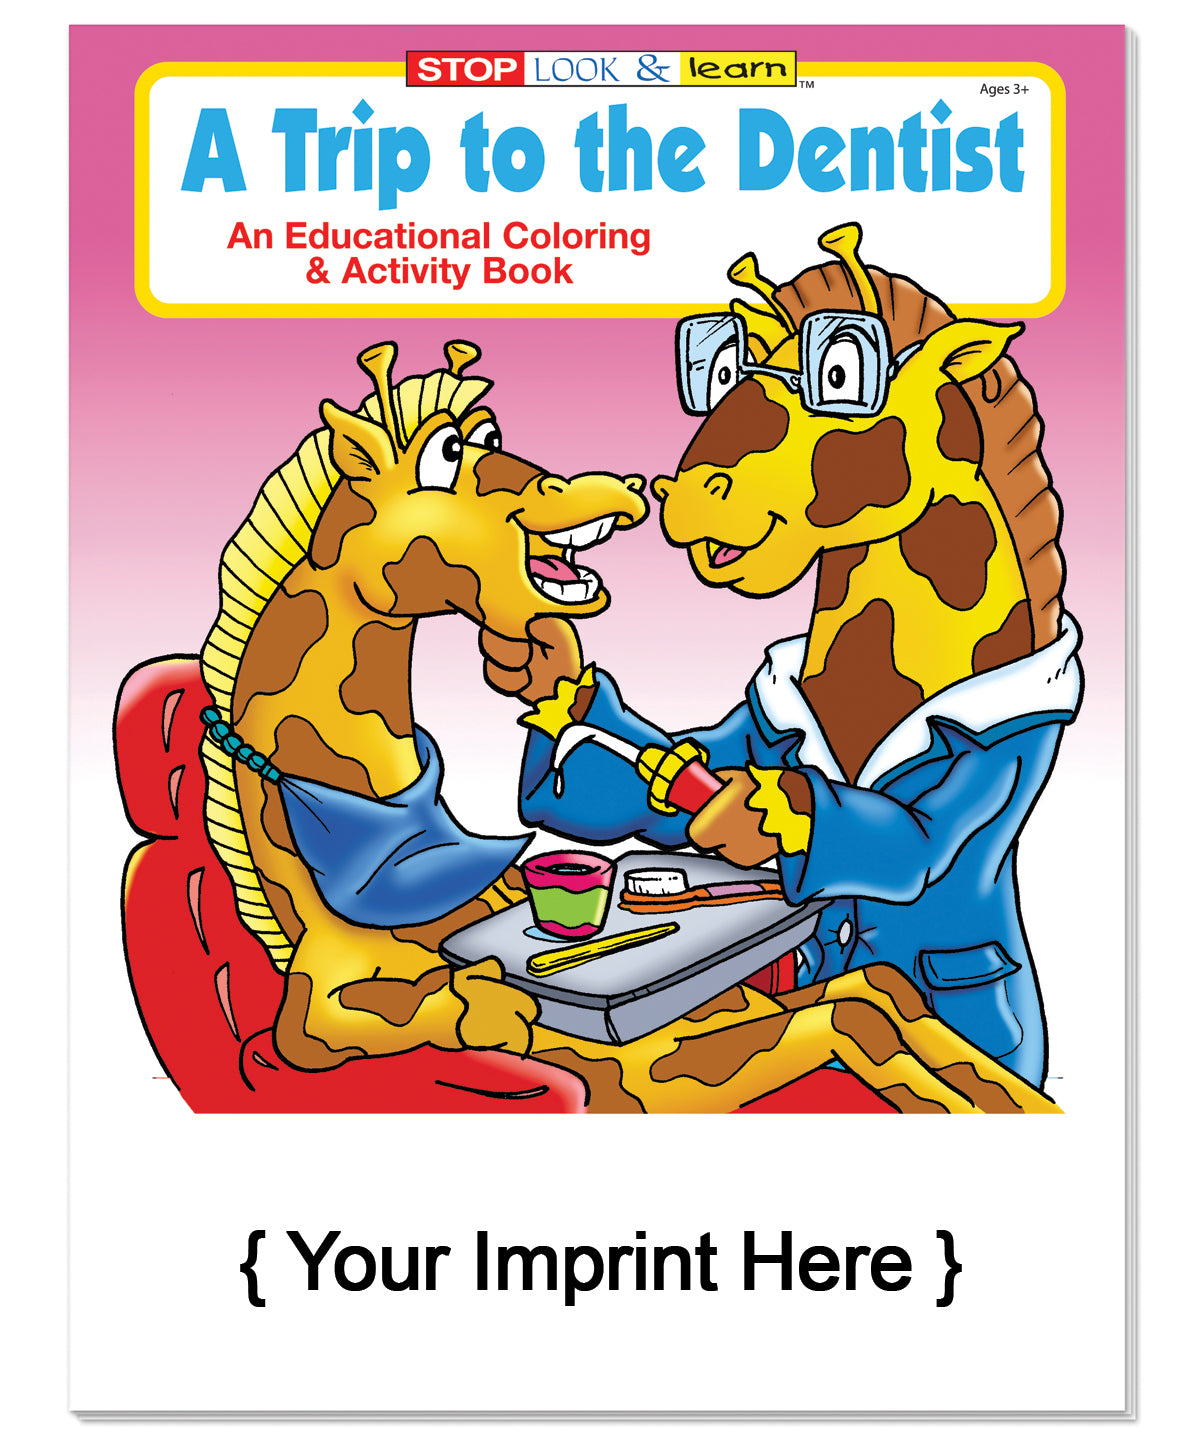 Dental Coloring Books for Kids, Set of 20, 5 x 7 Small Color Booklets ·  Art Creativity